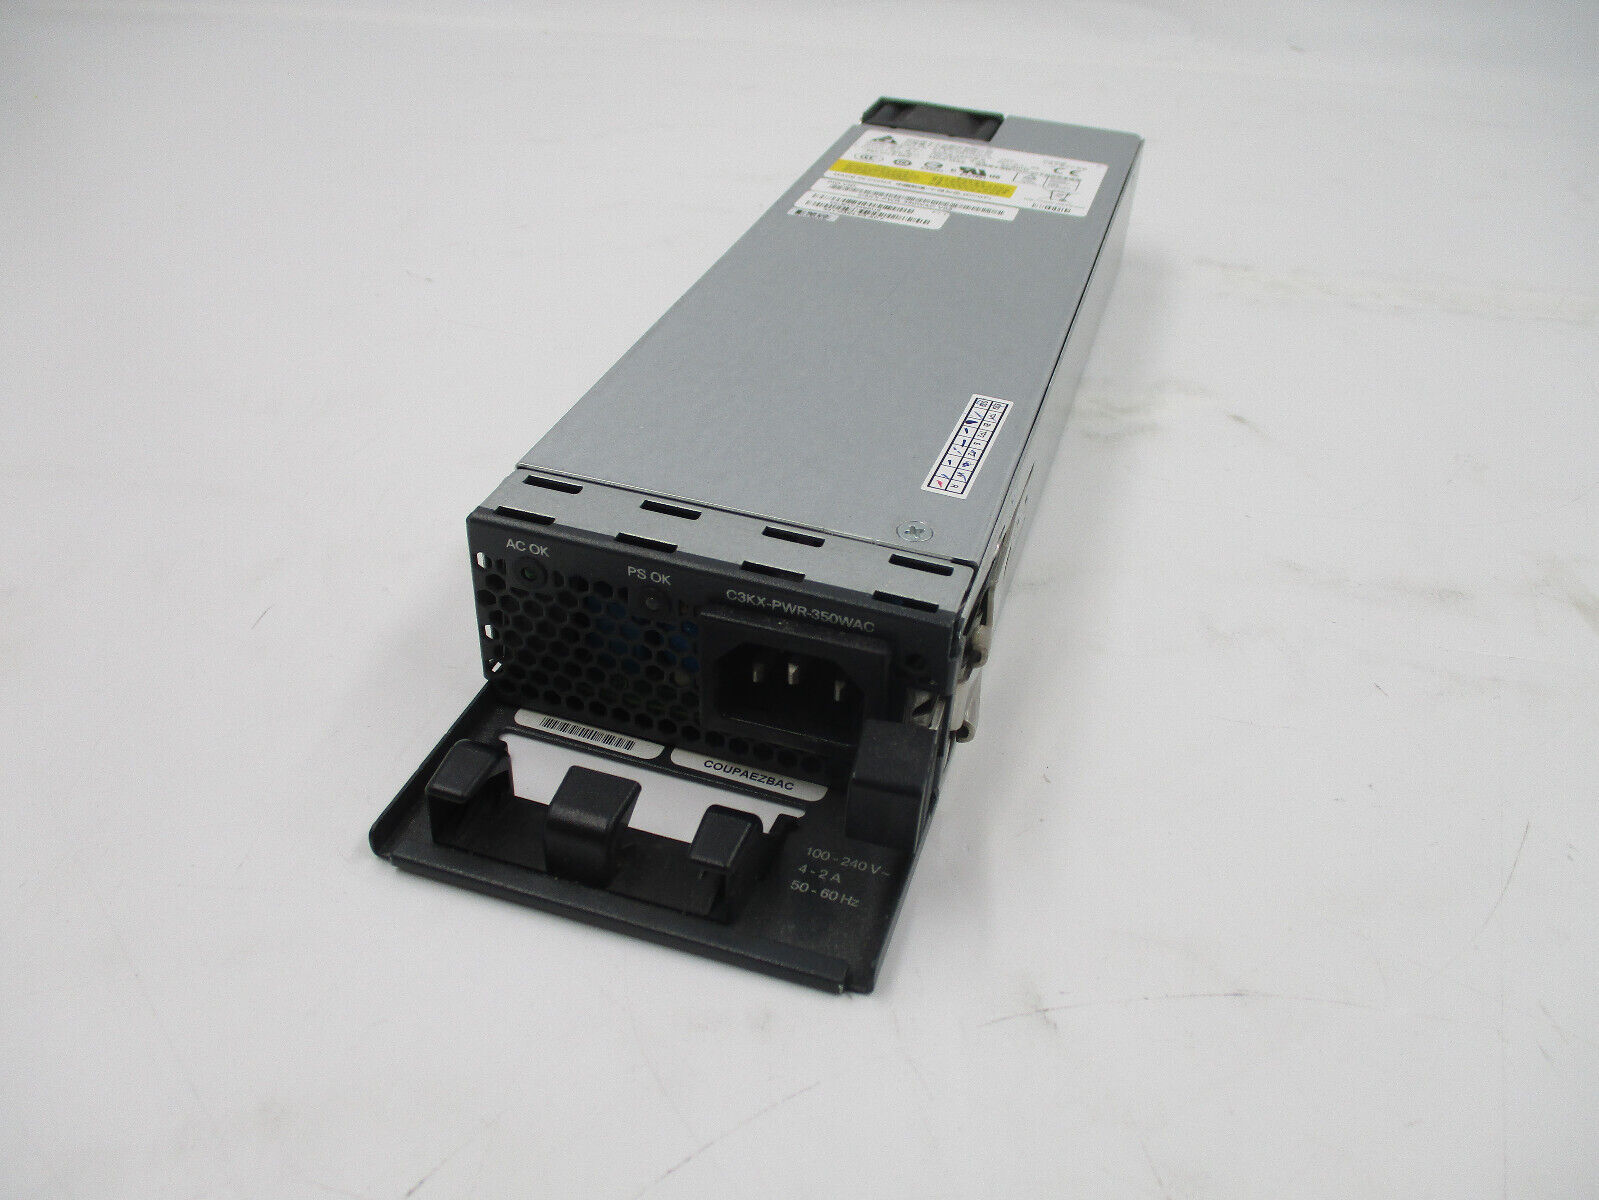 Delta EDPS-350CB A 350W Switching Power Supply Cisco : C3KX-PWR-350WAC Tested